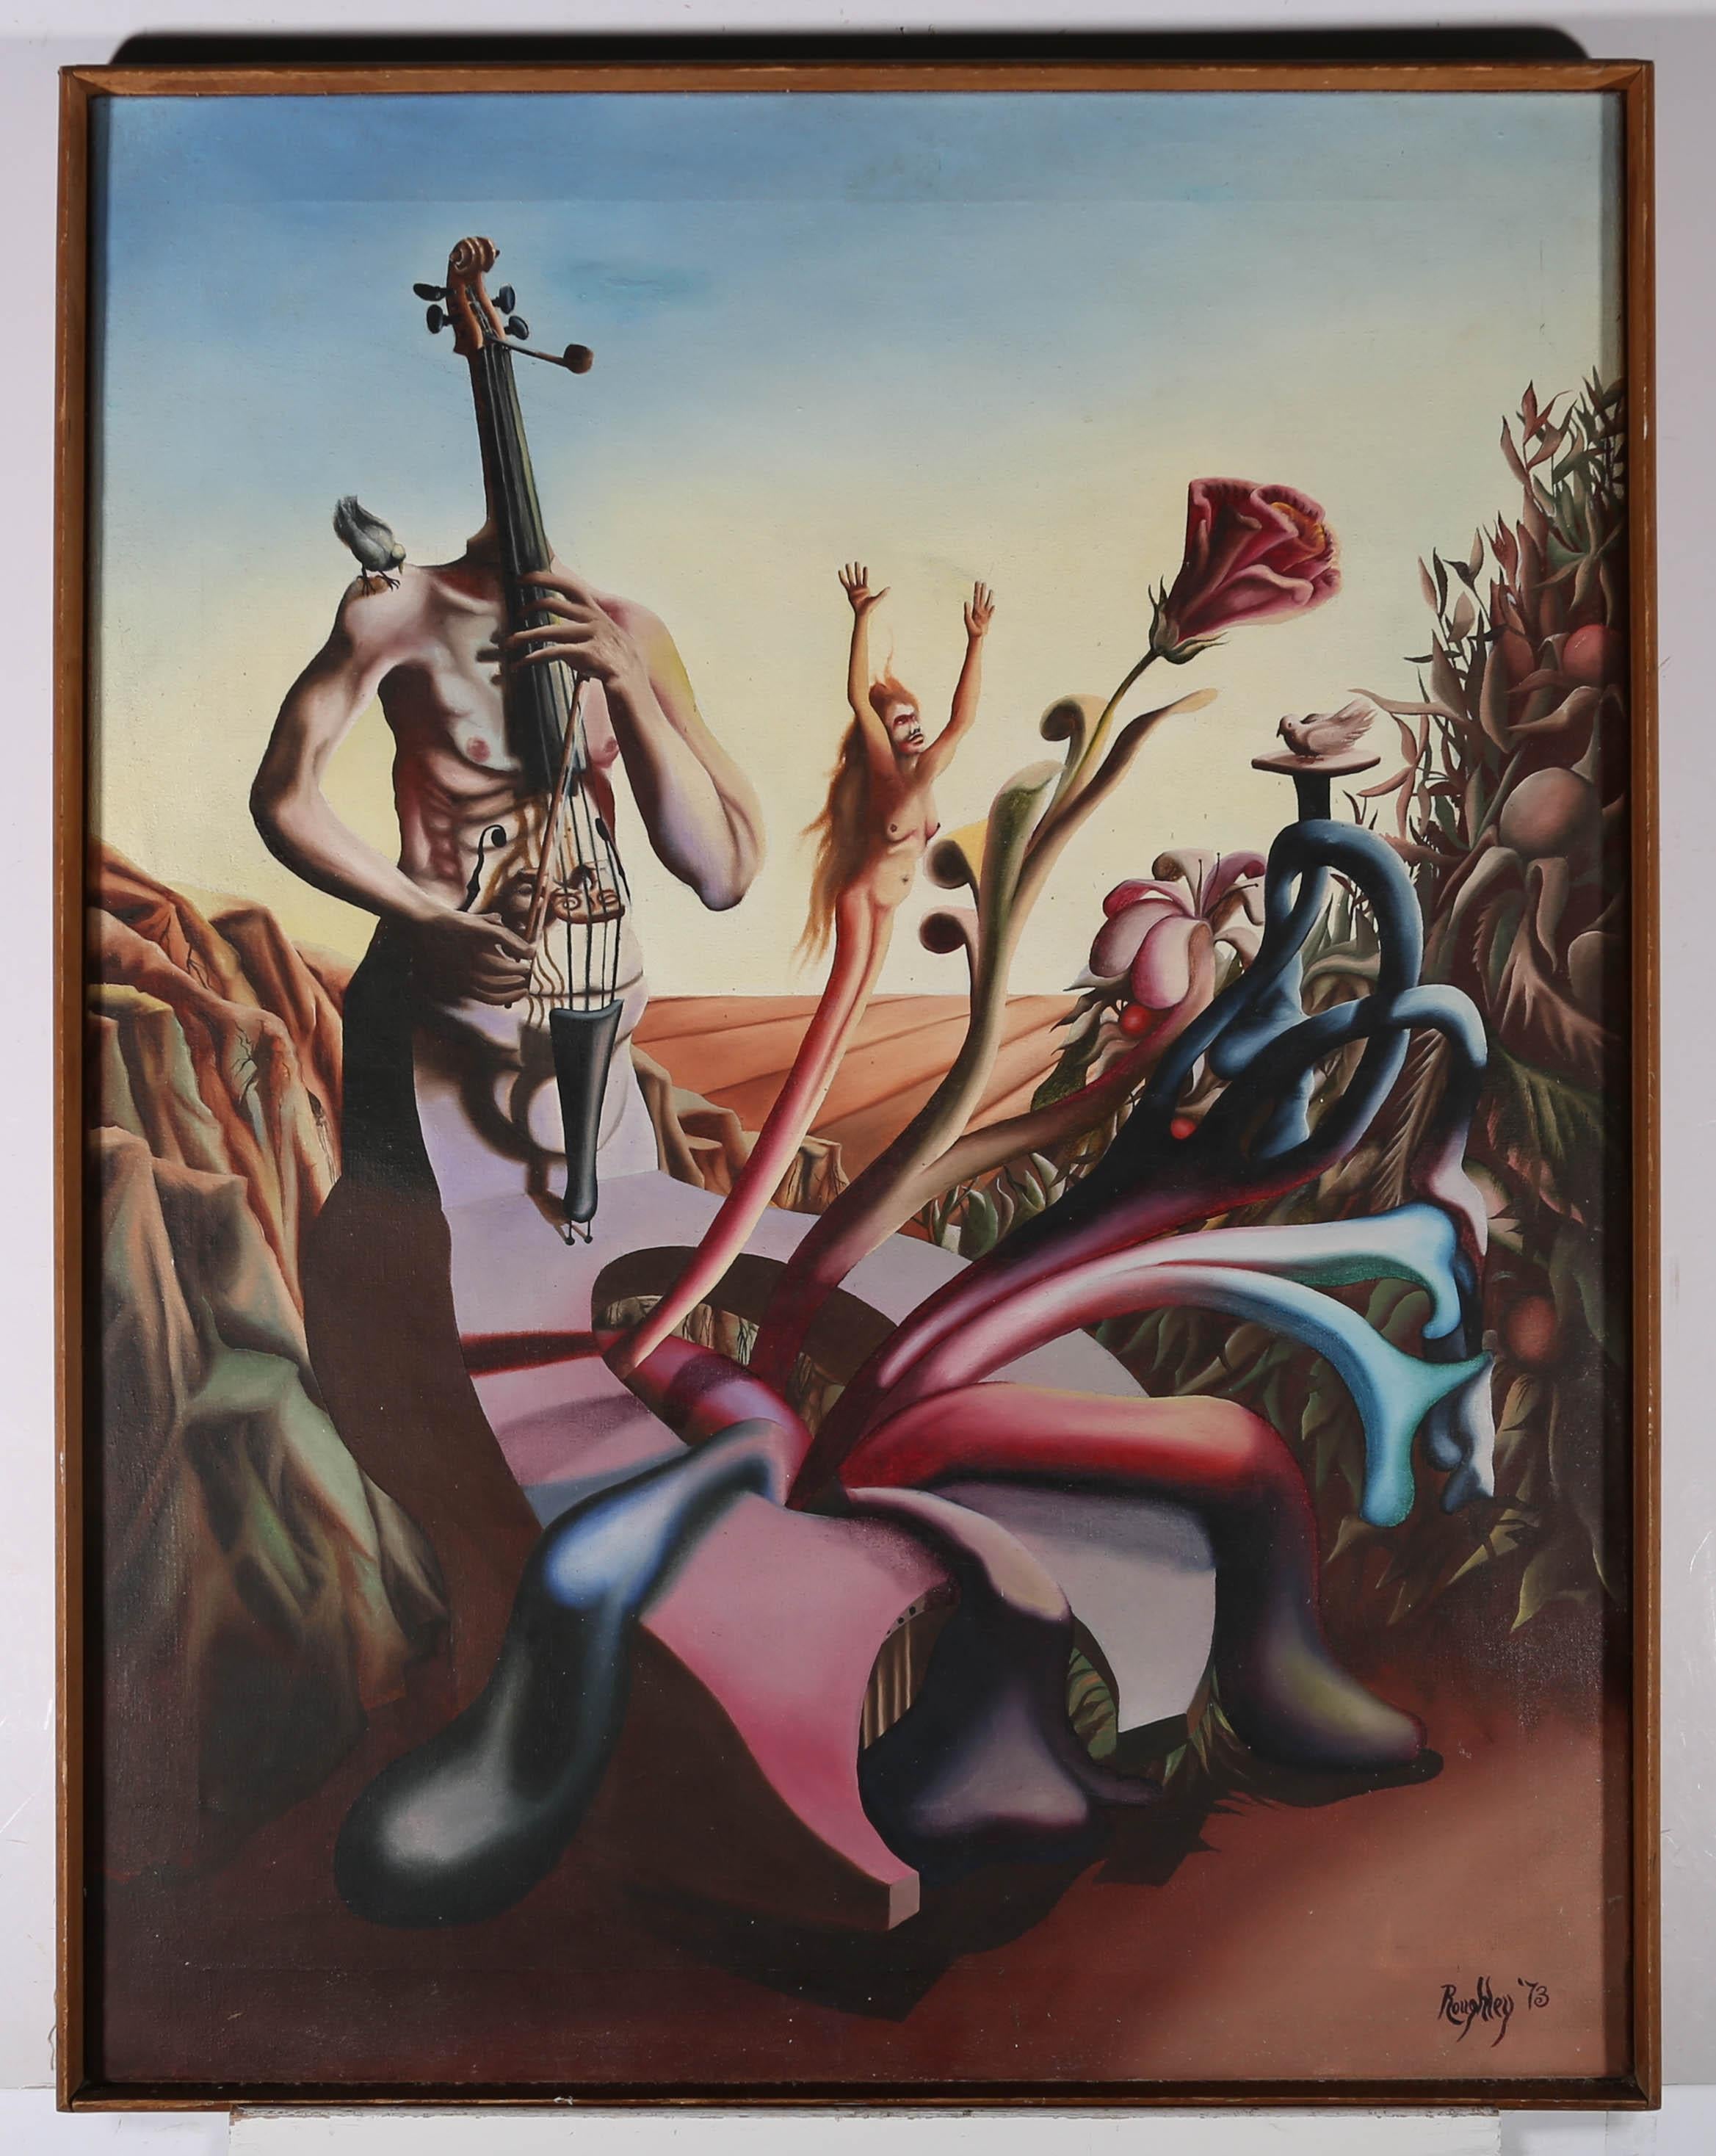 Roughley - Surrealist 1973 Oil, The Birth Of Music 2